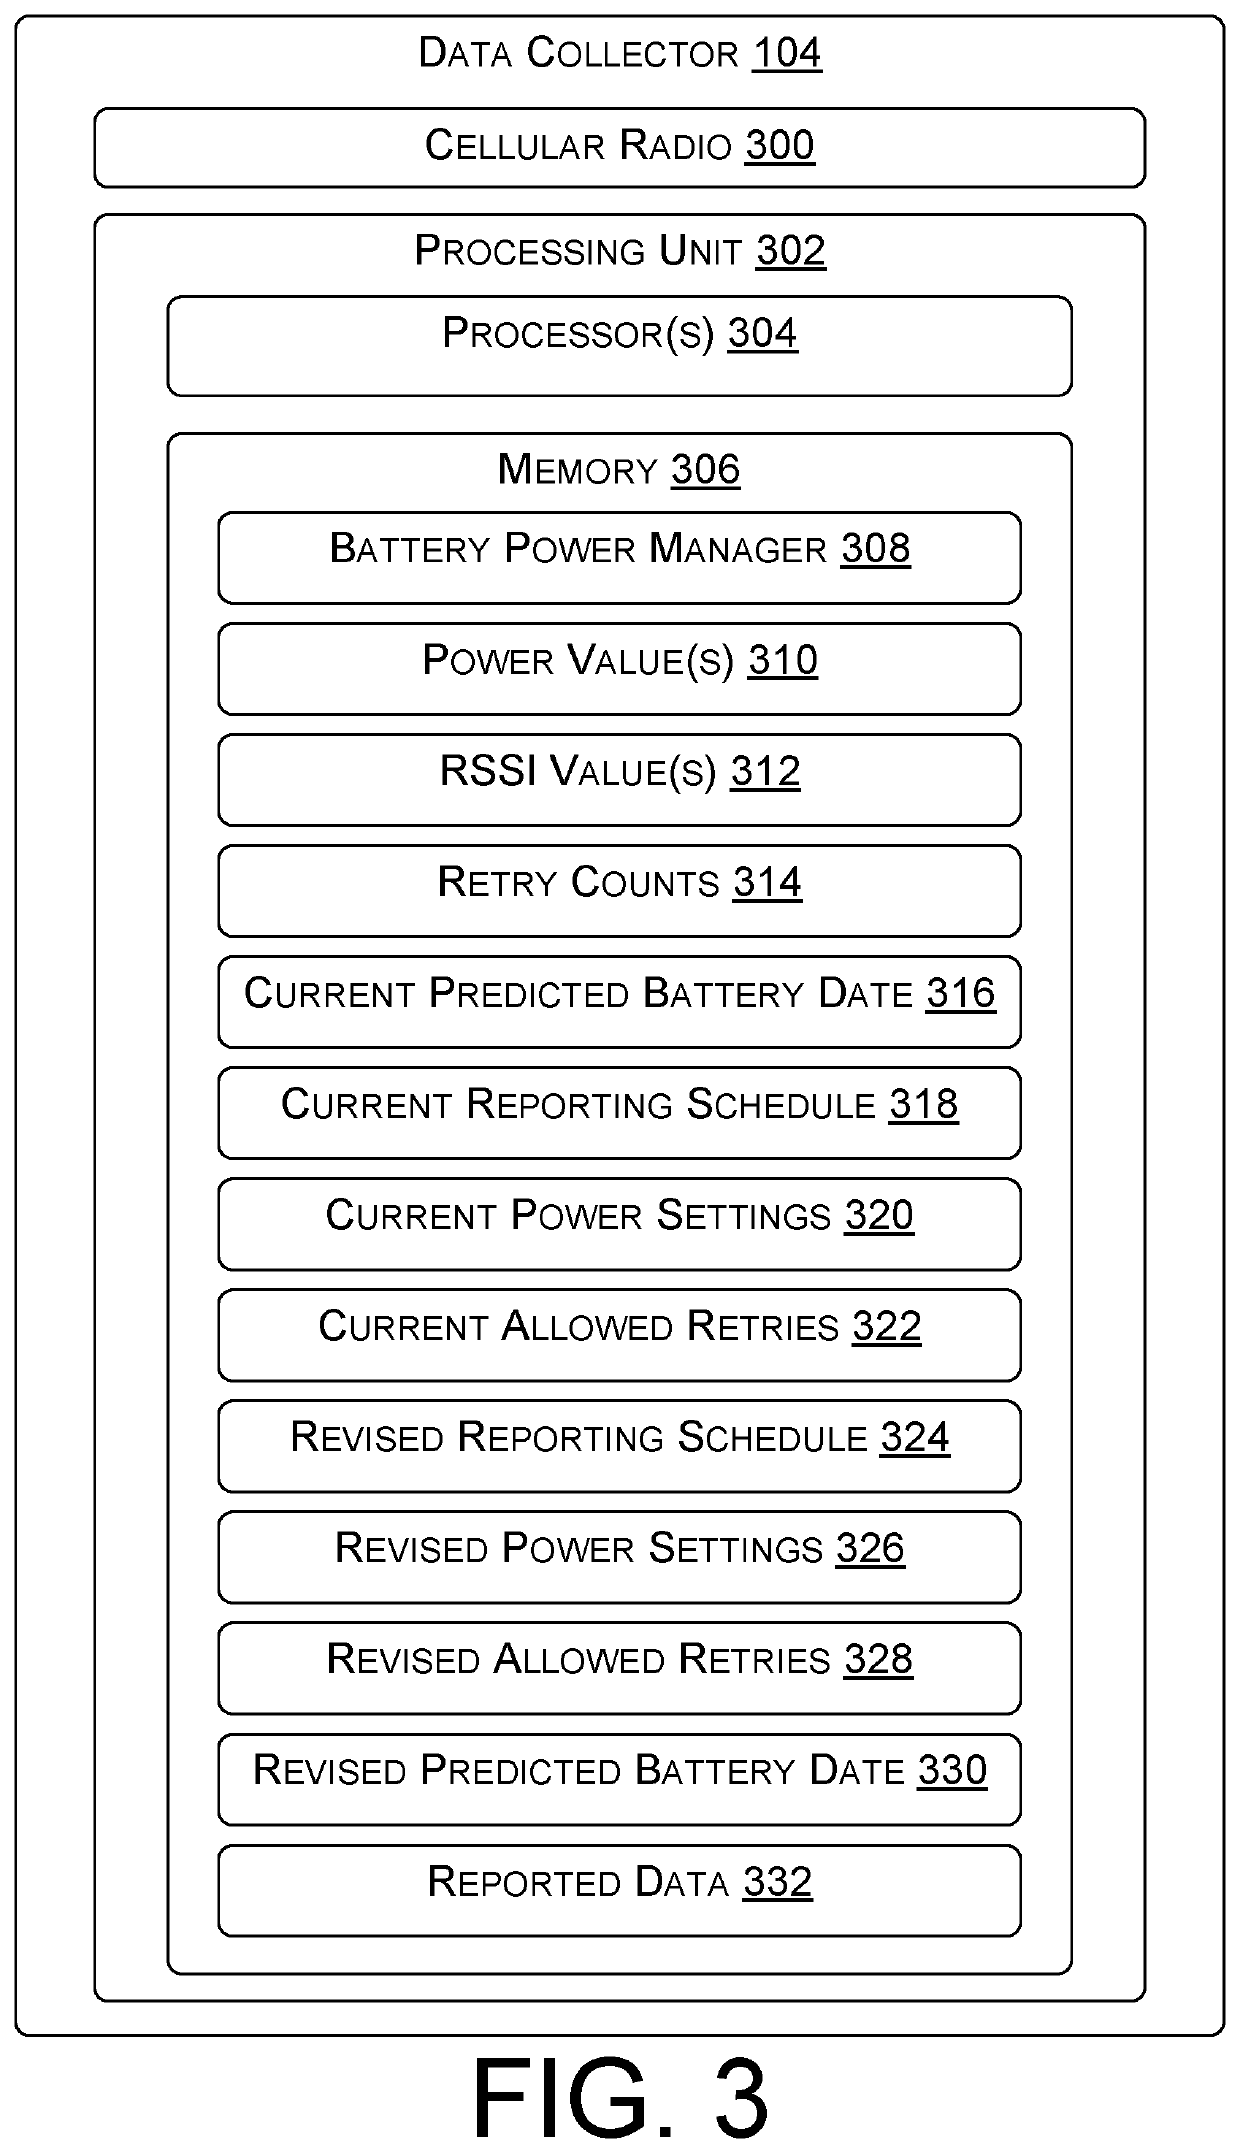 Device and Battery Management in a Cellular Network